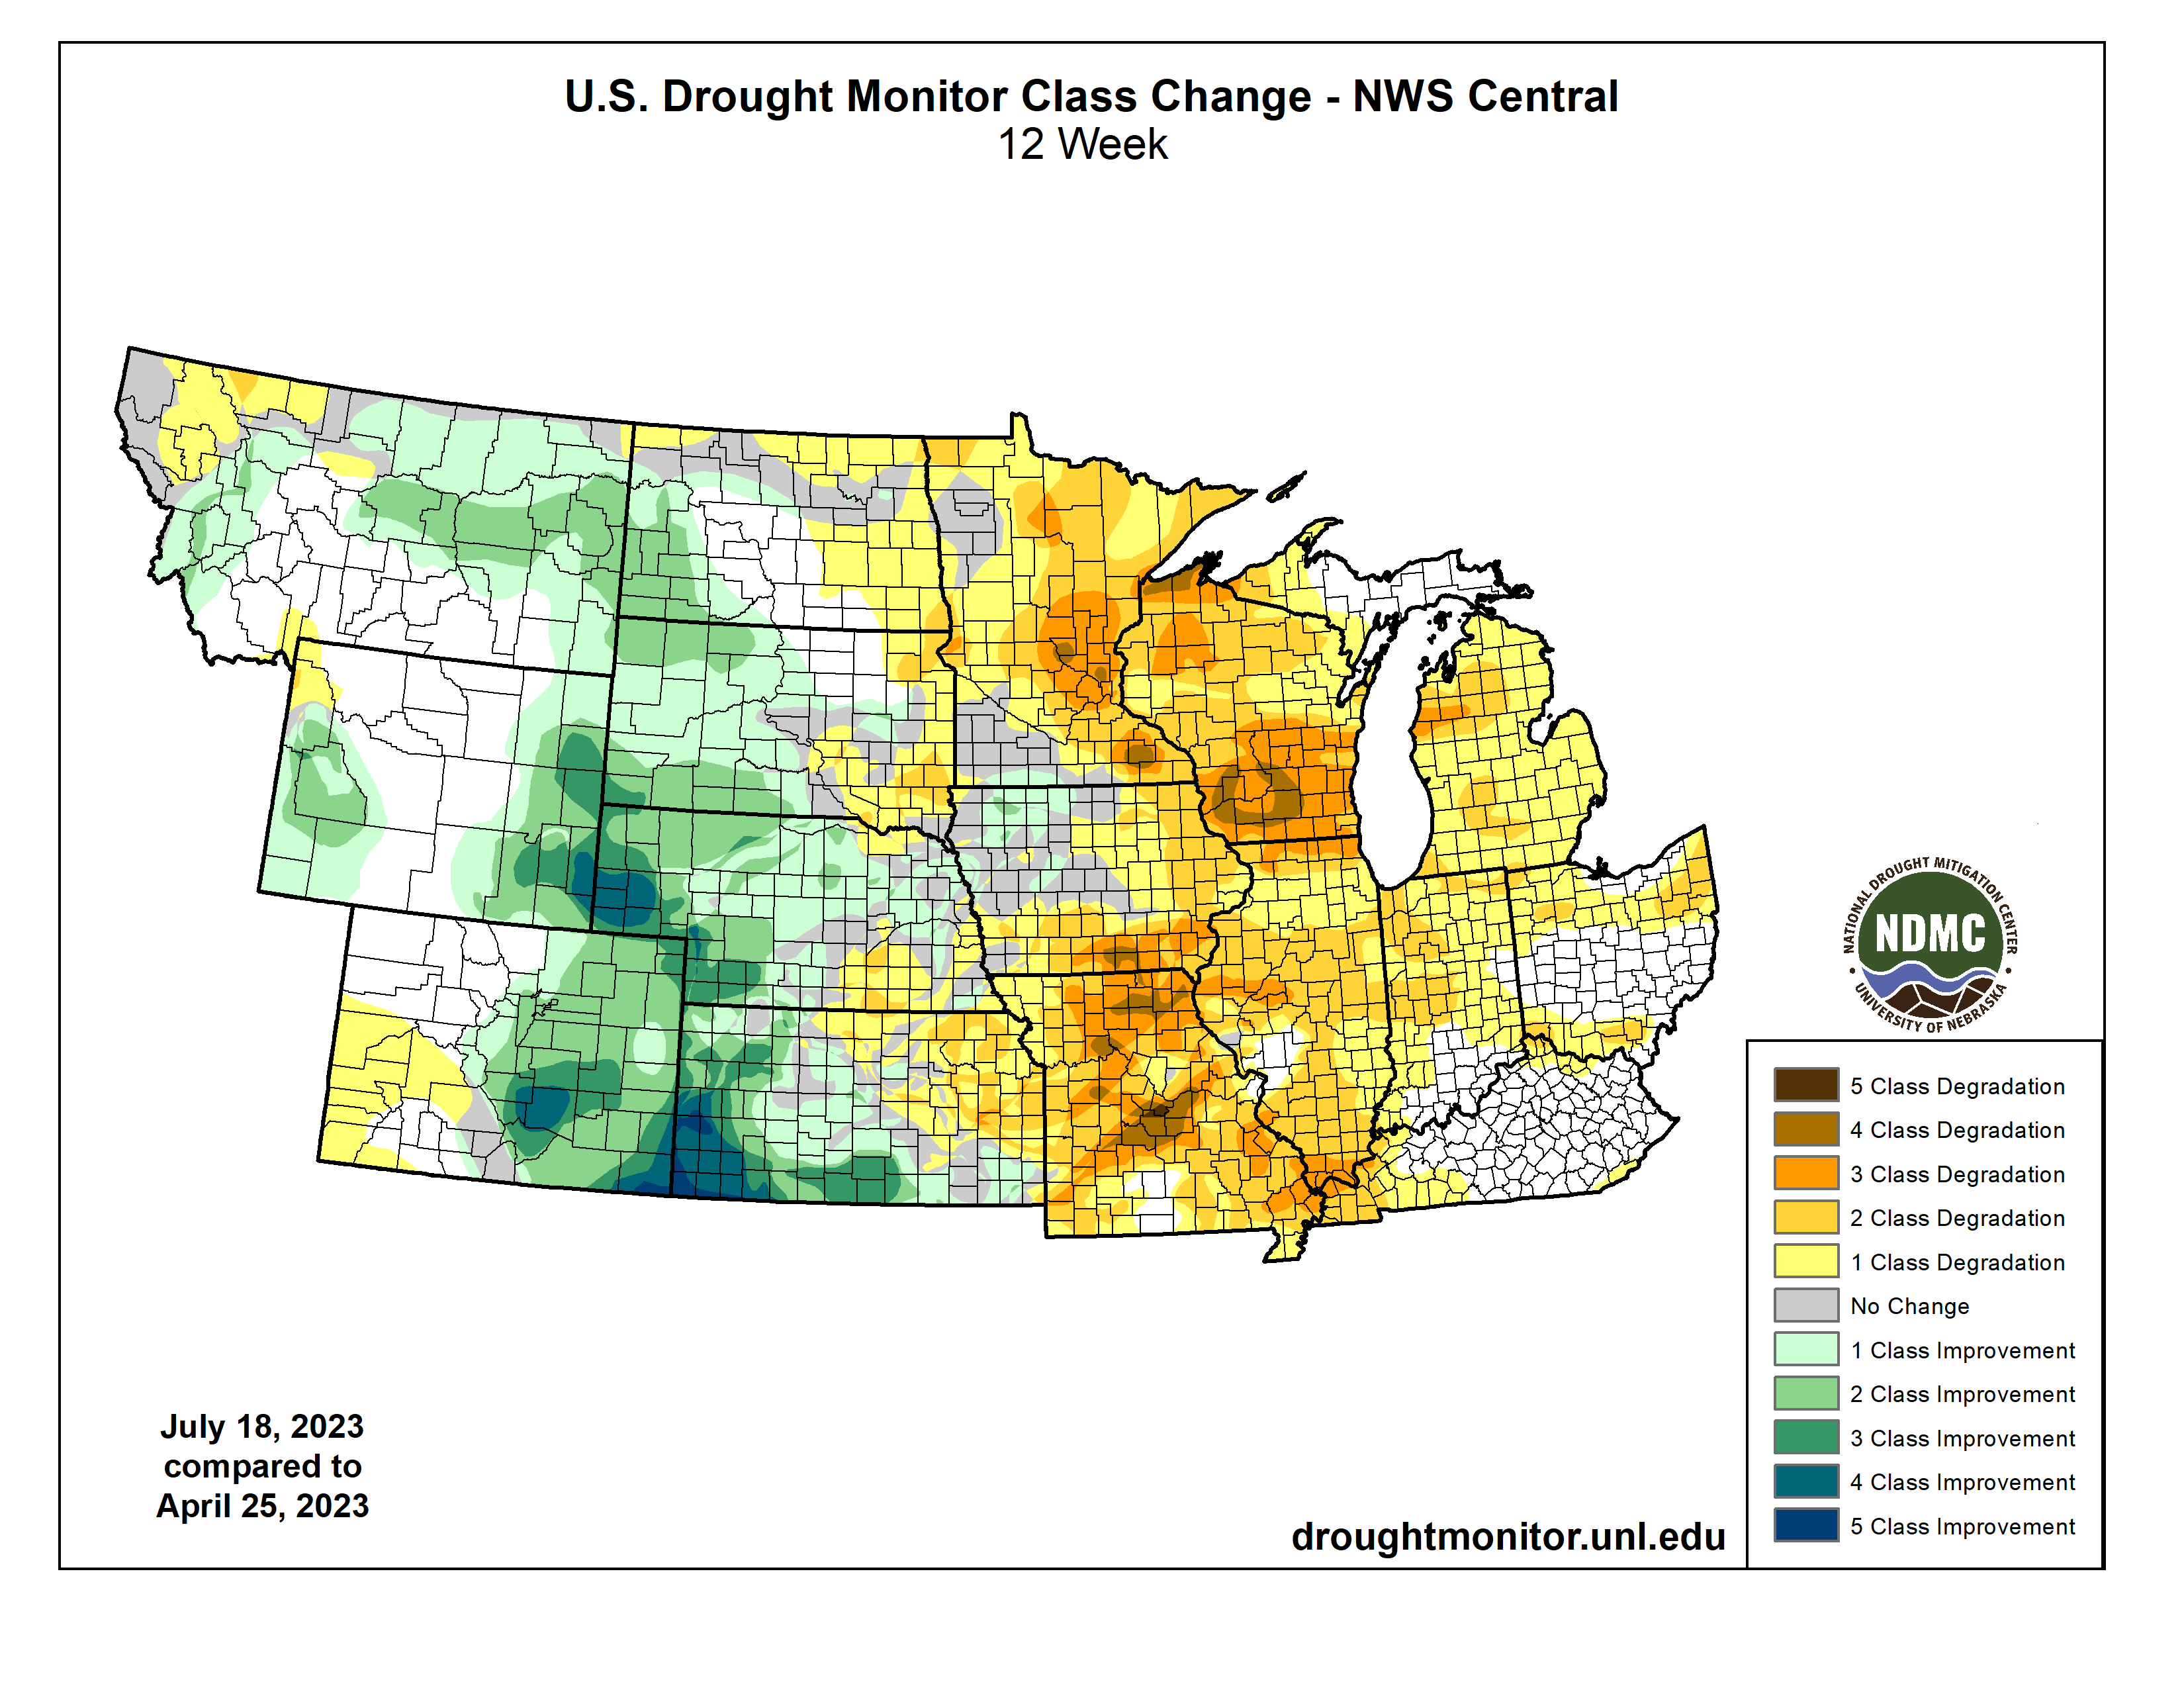 From April 25 to July 18, drought has worsened by four categories on the U.S. Drought Monitor in portions of Missouri, southern Iowa, Wisconsin and Minnesota.